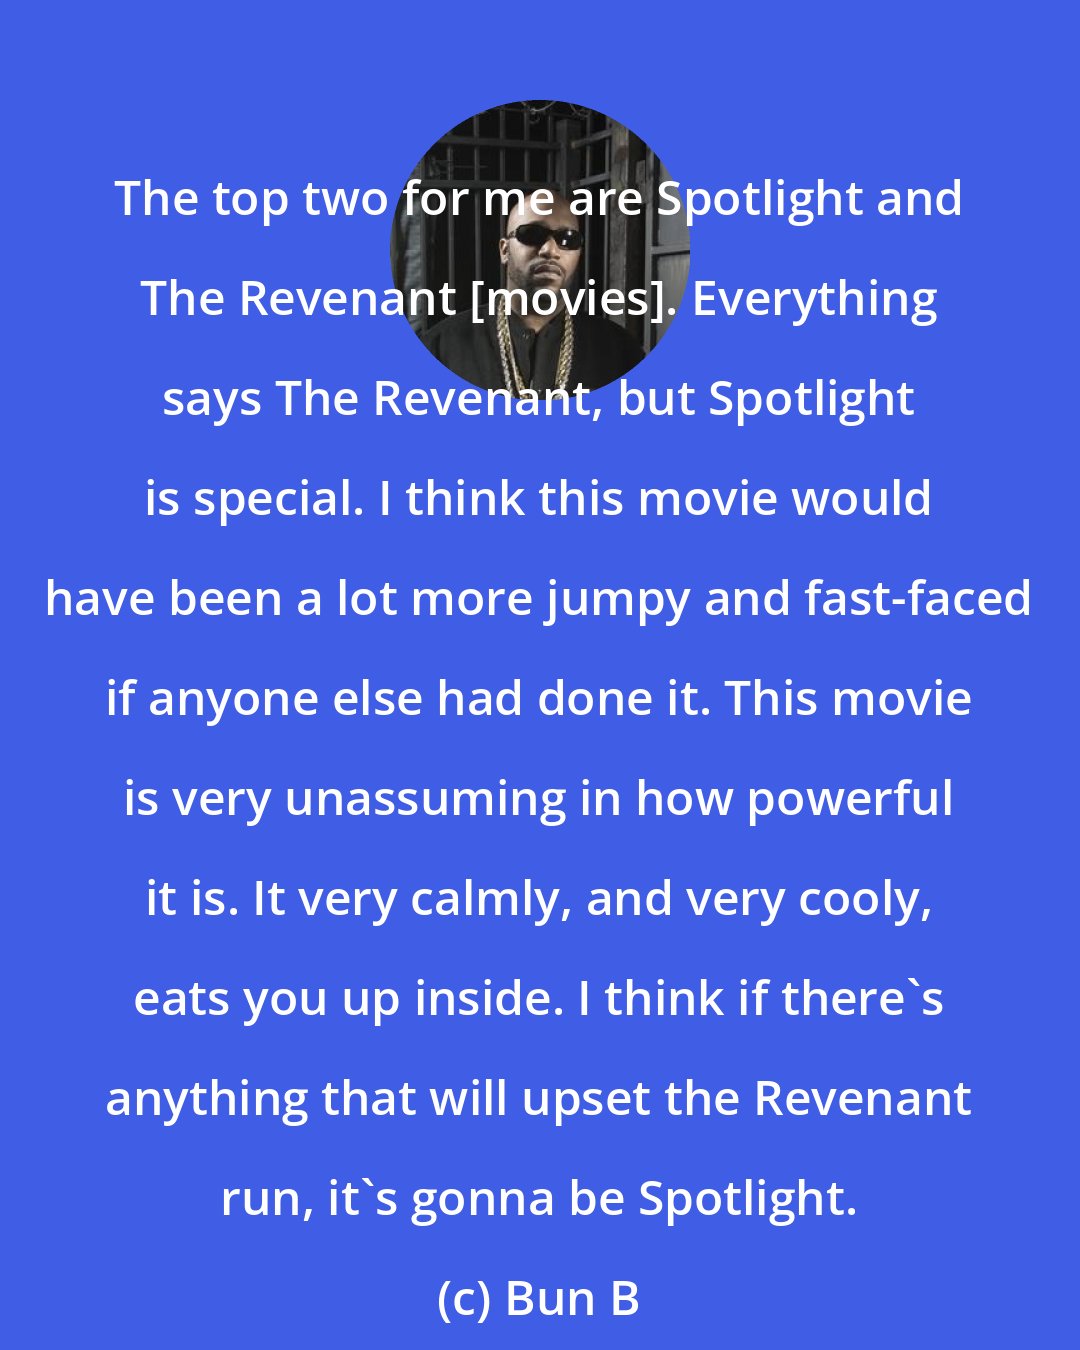 Bun B: The top two for me are Spotlight and The Revenant [movies]. Everything says The Revenant, but Spotlight is special. I think this movie would have been a lot more jumpy and fast-faced if anyone else had done it. This movie is very unassuming in how powerful it is. It very calmly, and very cooly, eats you up inside. I think if there's anything that will upset the Revenant run, it's gonna be Spotlight.